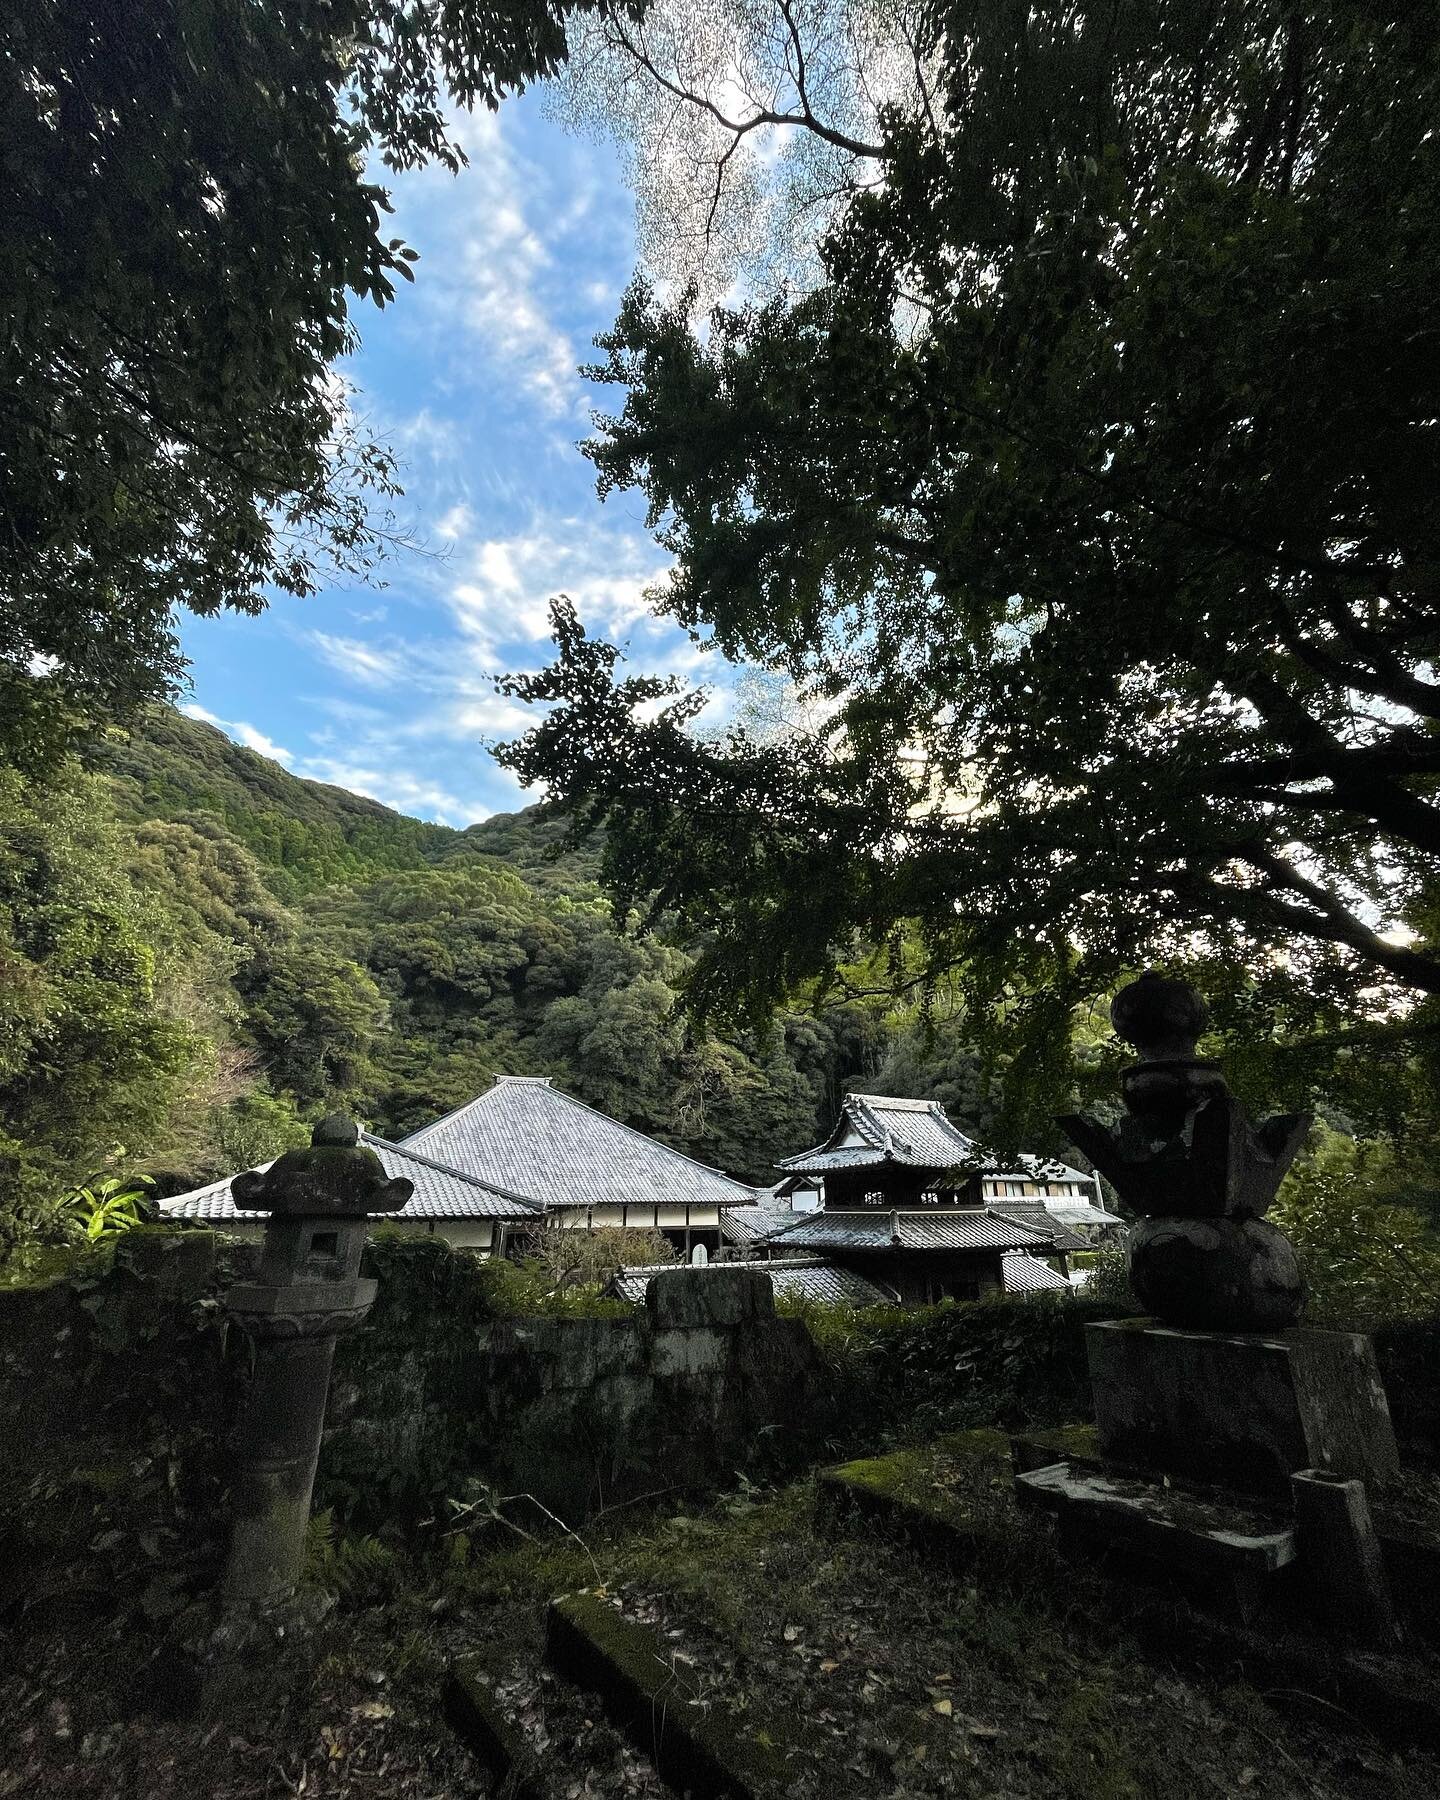 It&rsquo;s so beautiful here! 🌿

Takeo is a town surrounded by a lot of mountains, many many shrines, dense bamboo forests and some majestic ancient trees.

The past month I&rsquo;ve been making hikes to collect inspiration for my project during my 